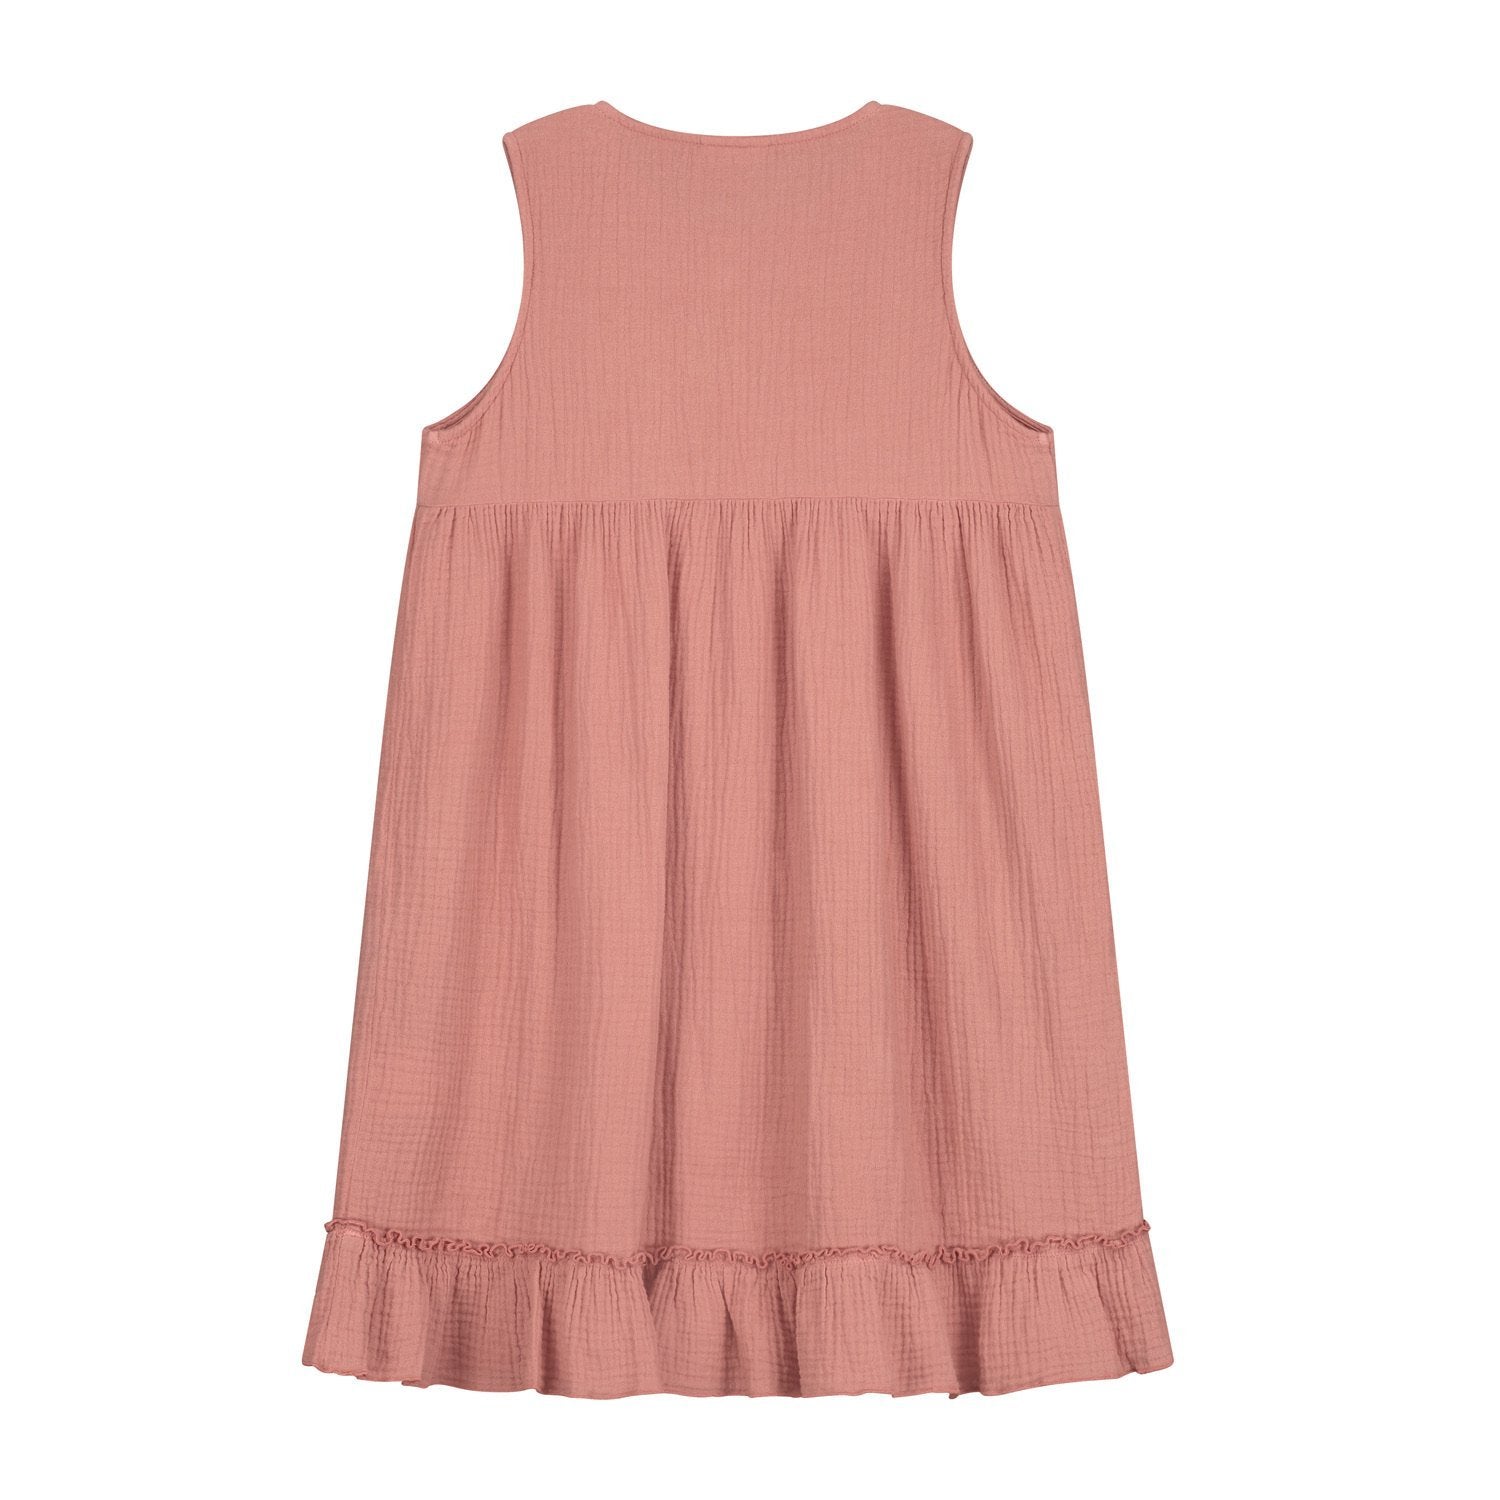 Moon Kleid - Rose Dawn find Stylish Fashion for Little People- at Little Foxx Concept Store